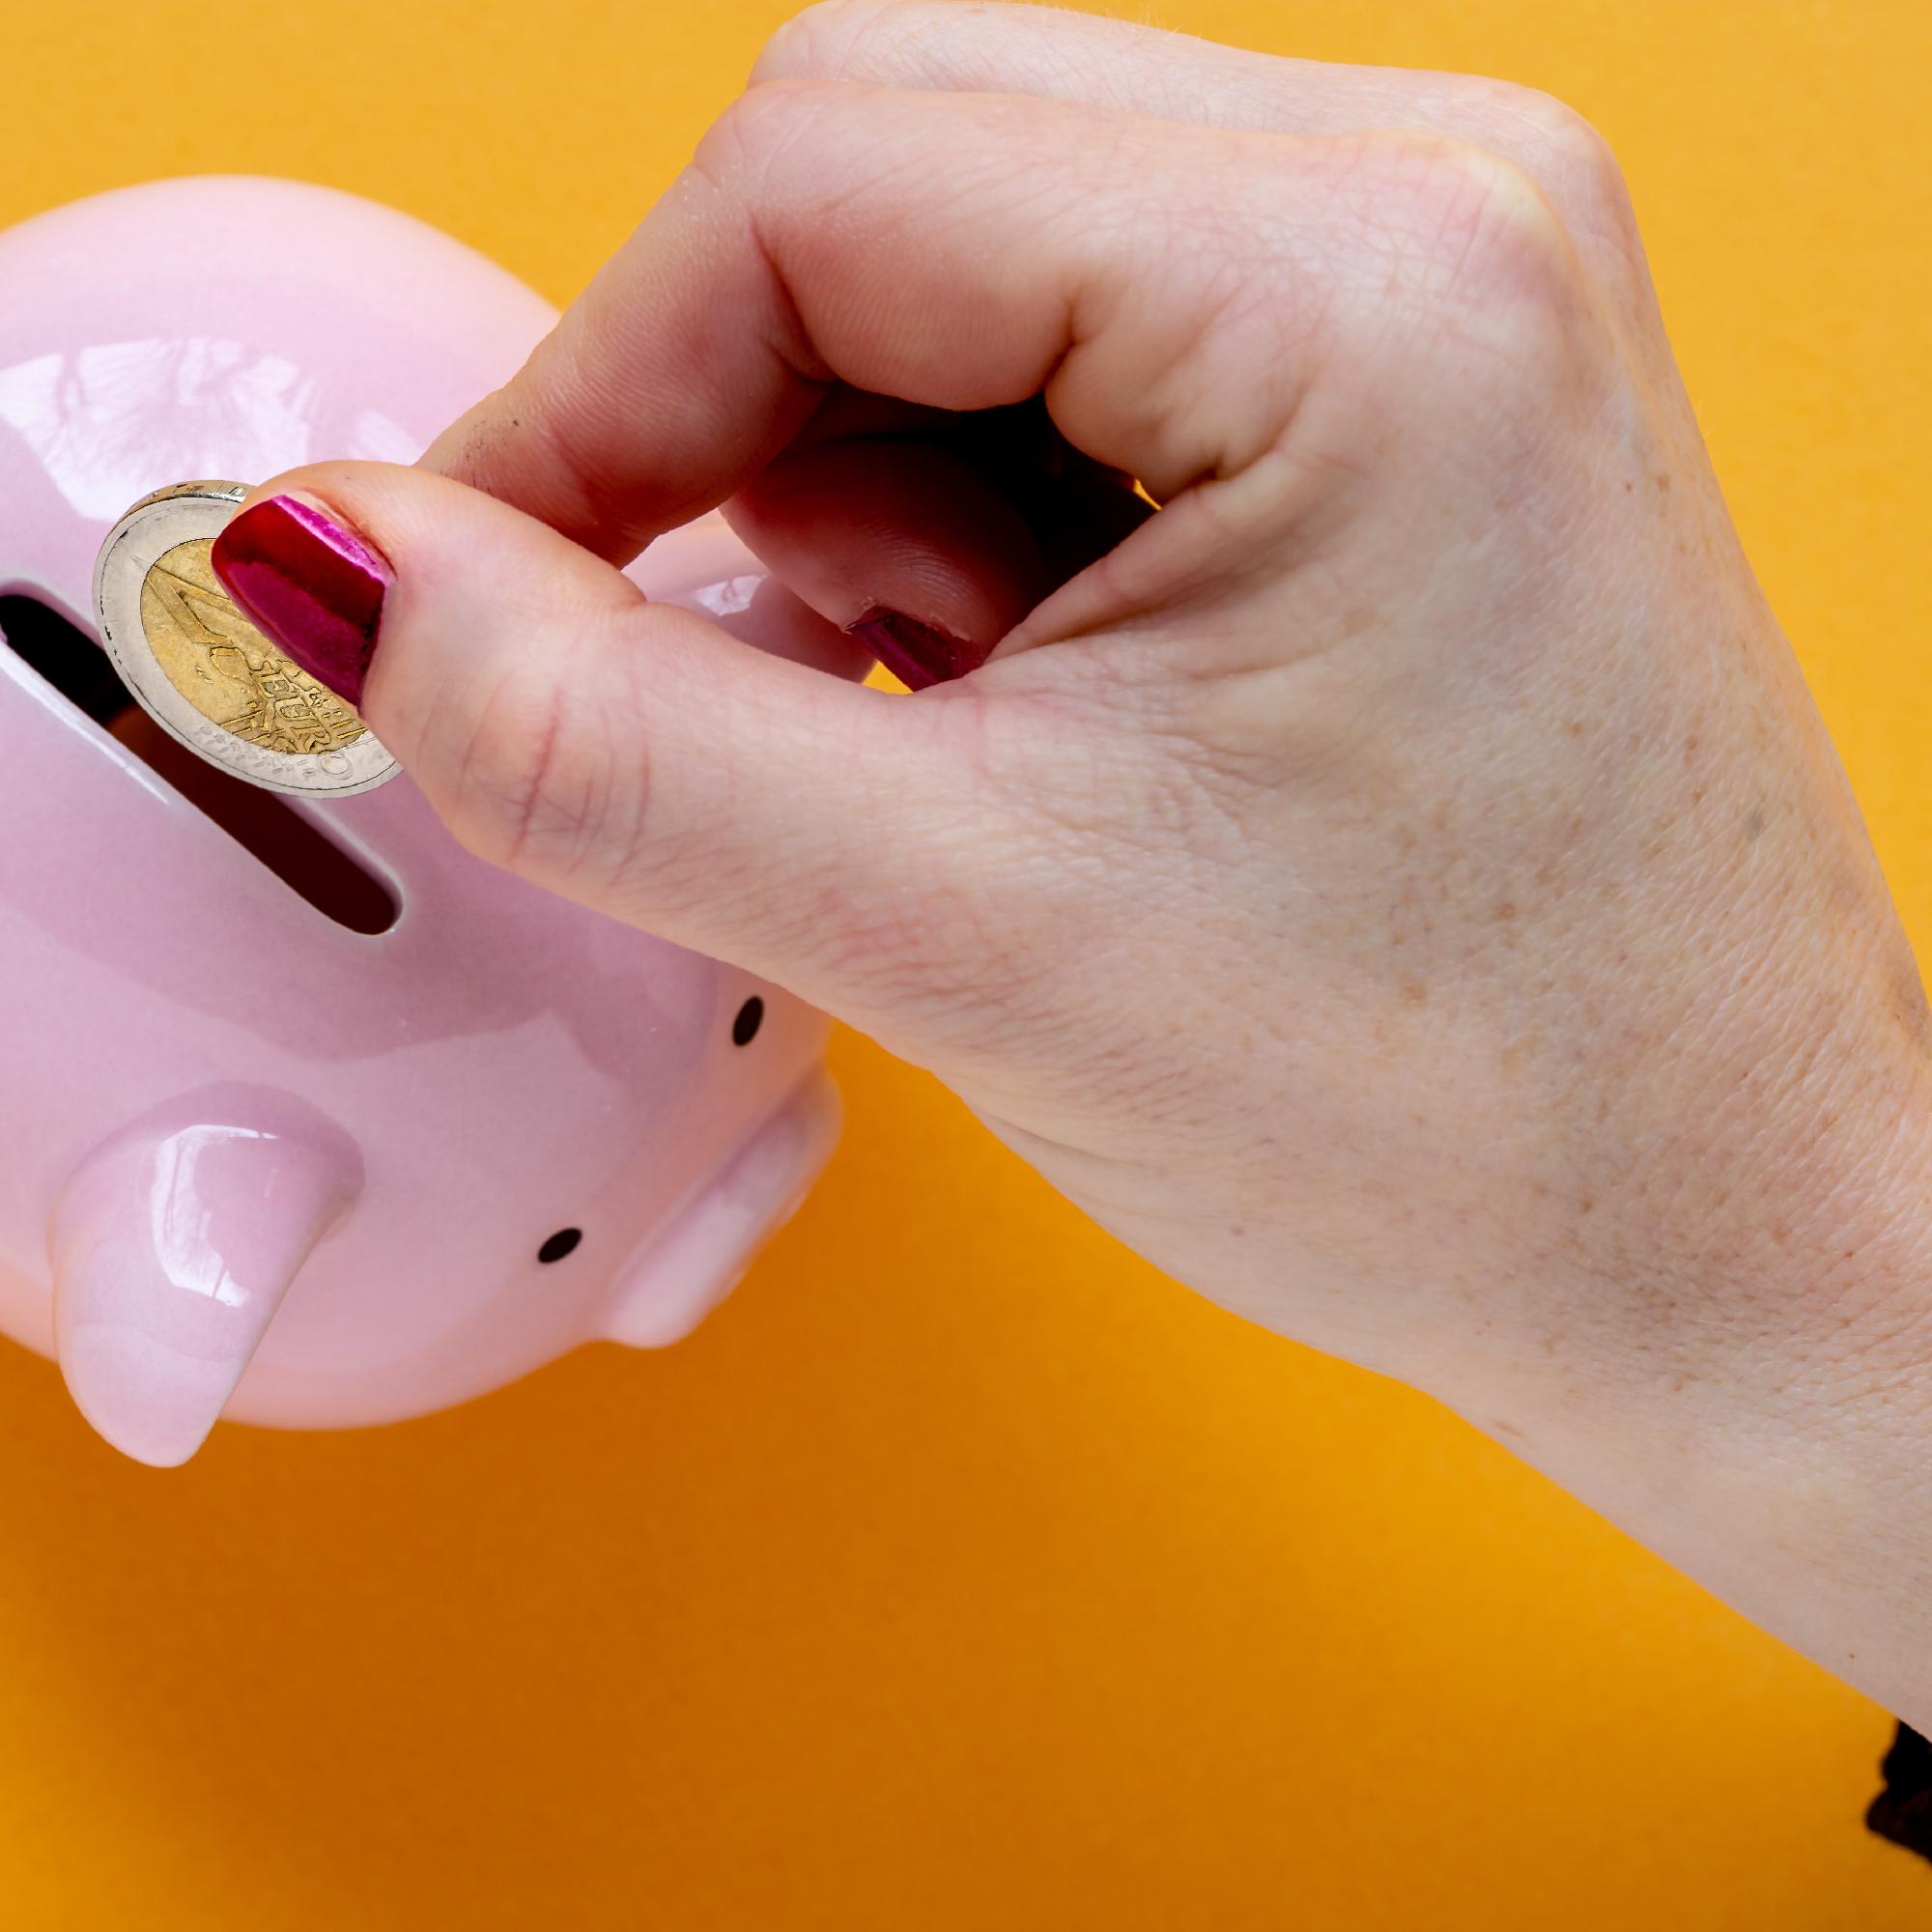 close up of woman putting money in a piggy bank on yellow background